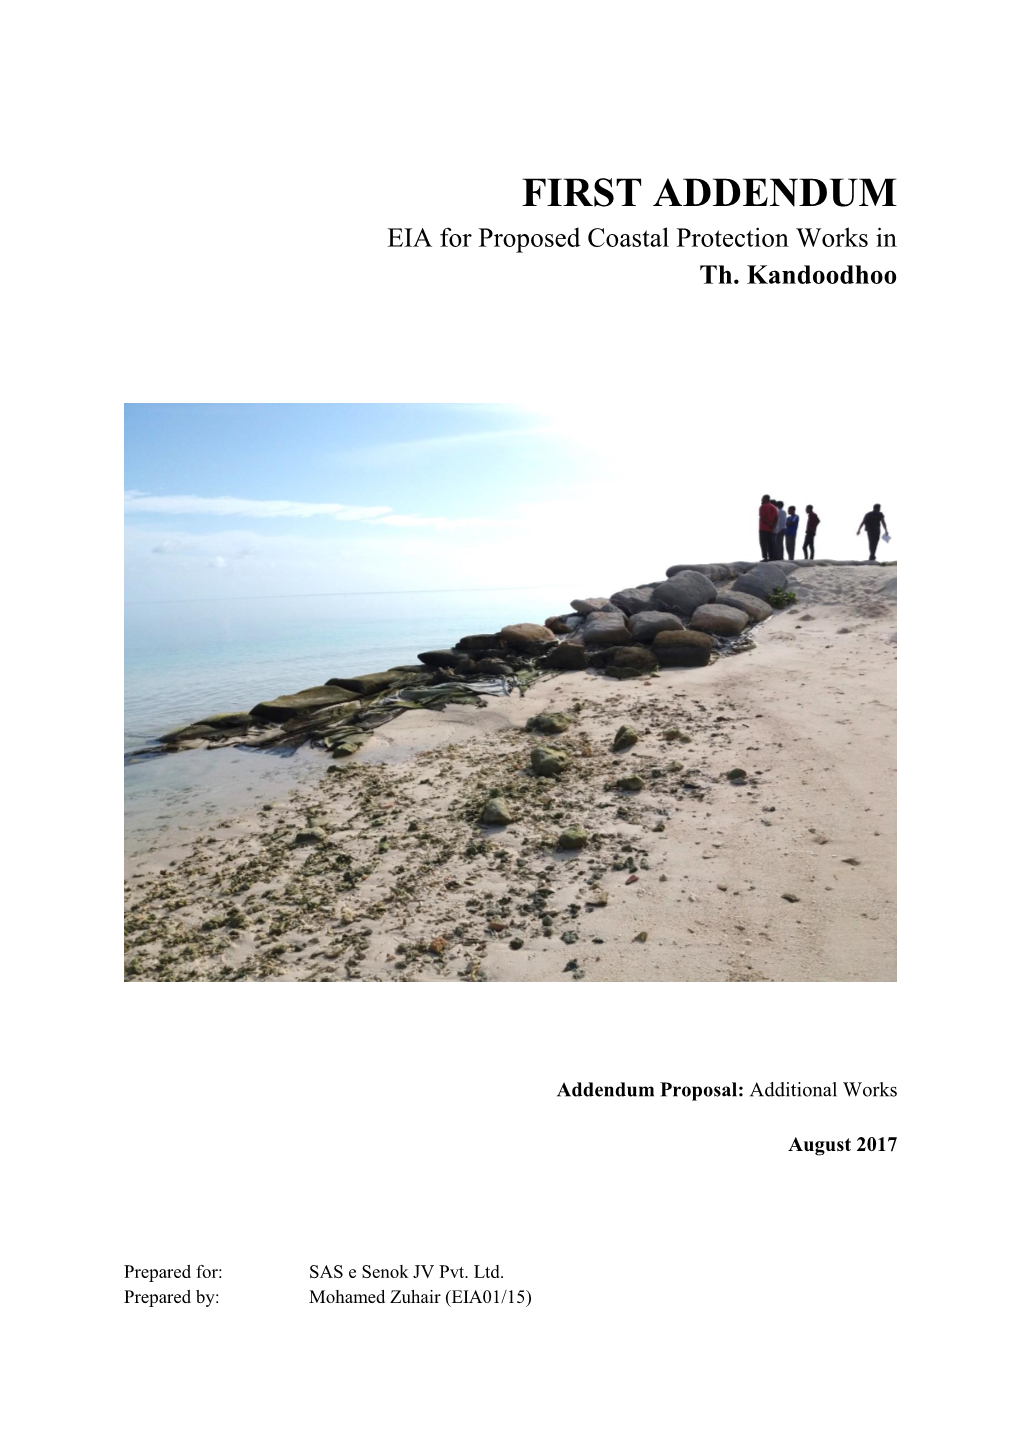 First Addendum: EIA for Coastal Protection Works in Th. Kandoodhoo August 2017